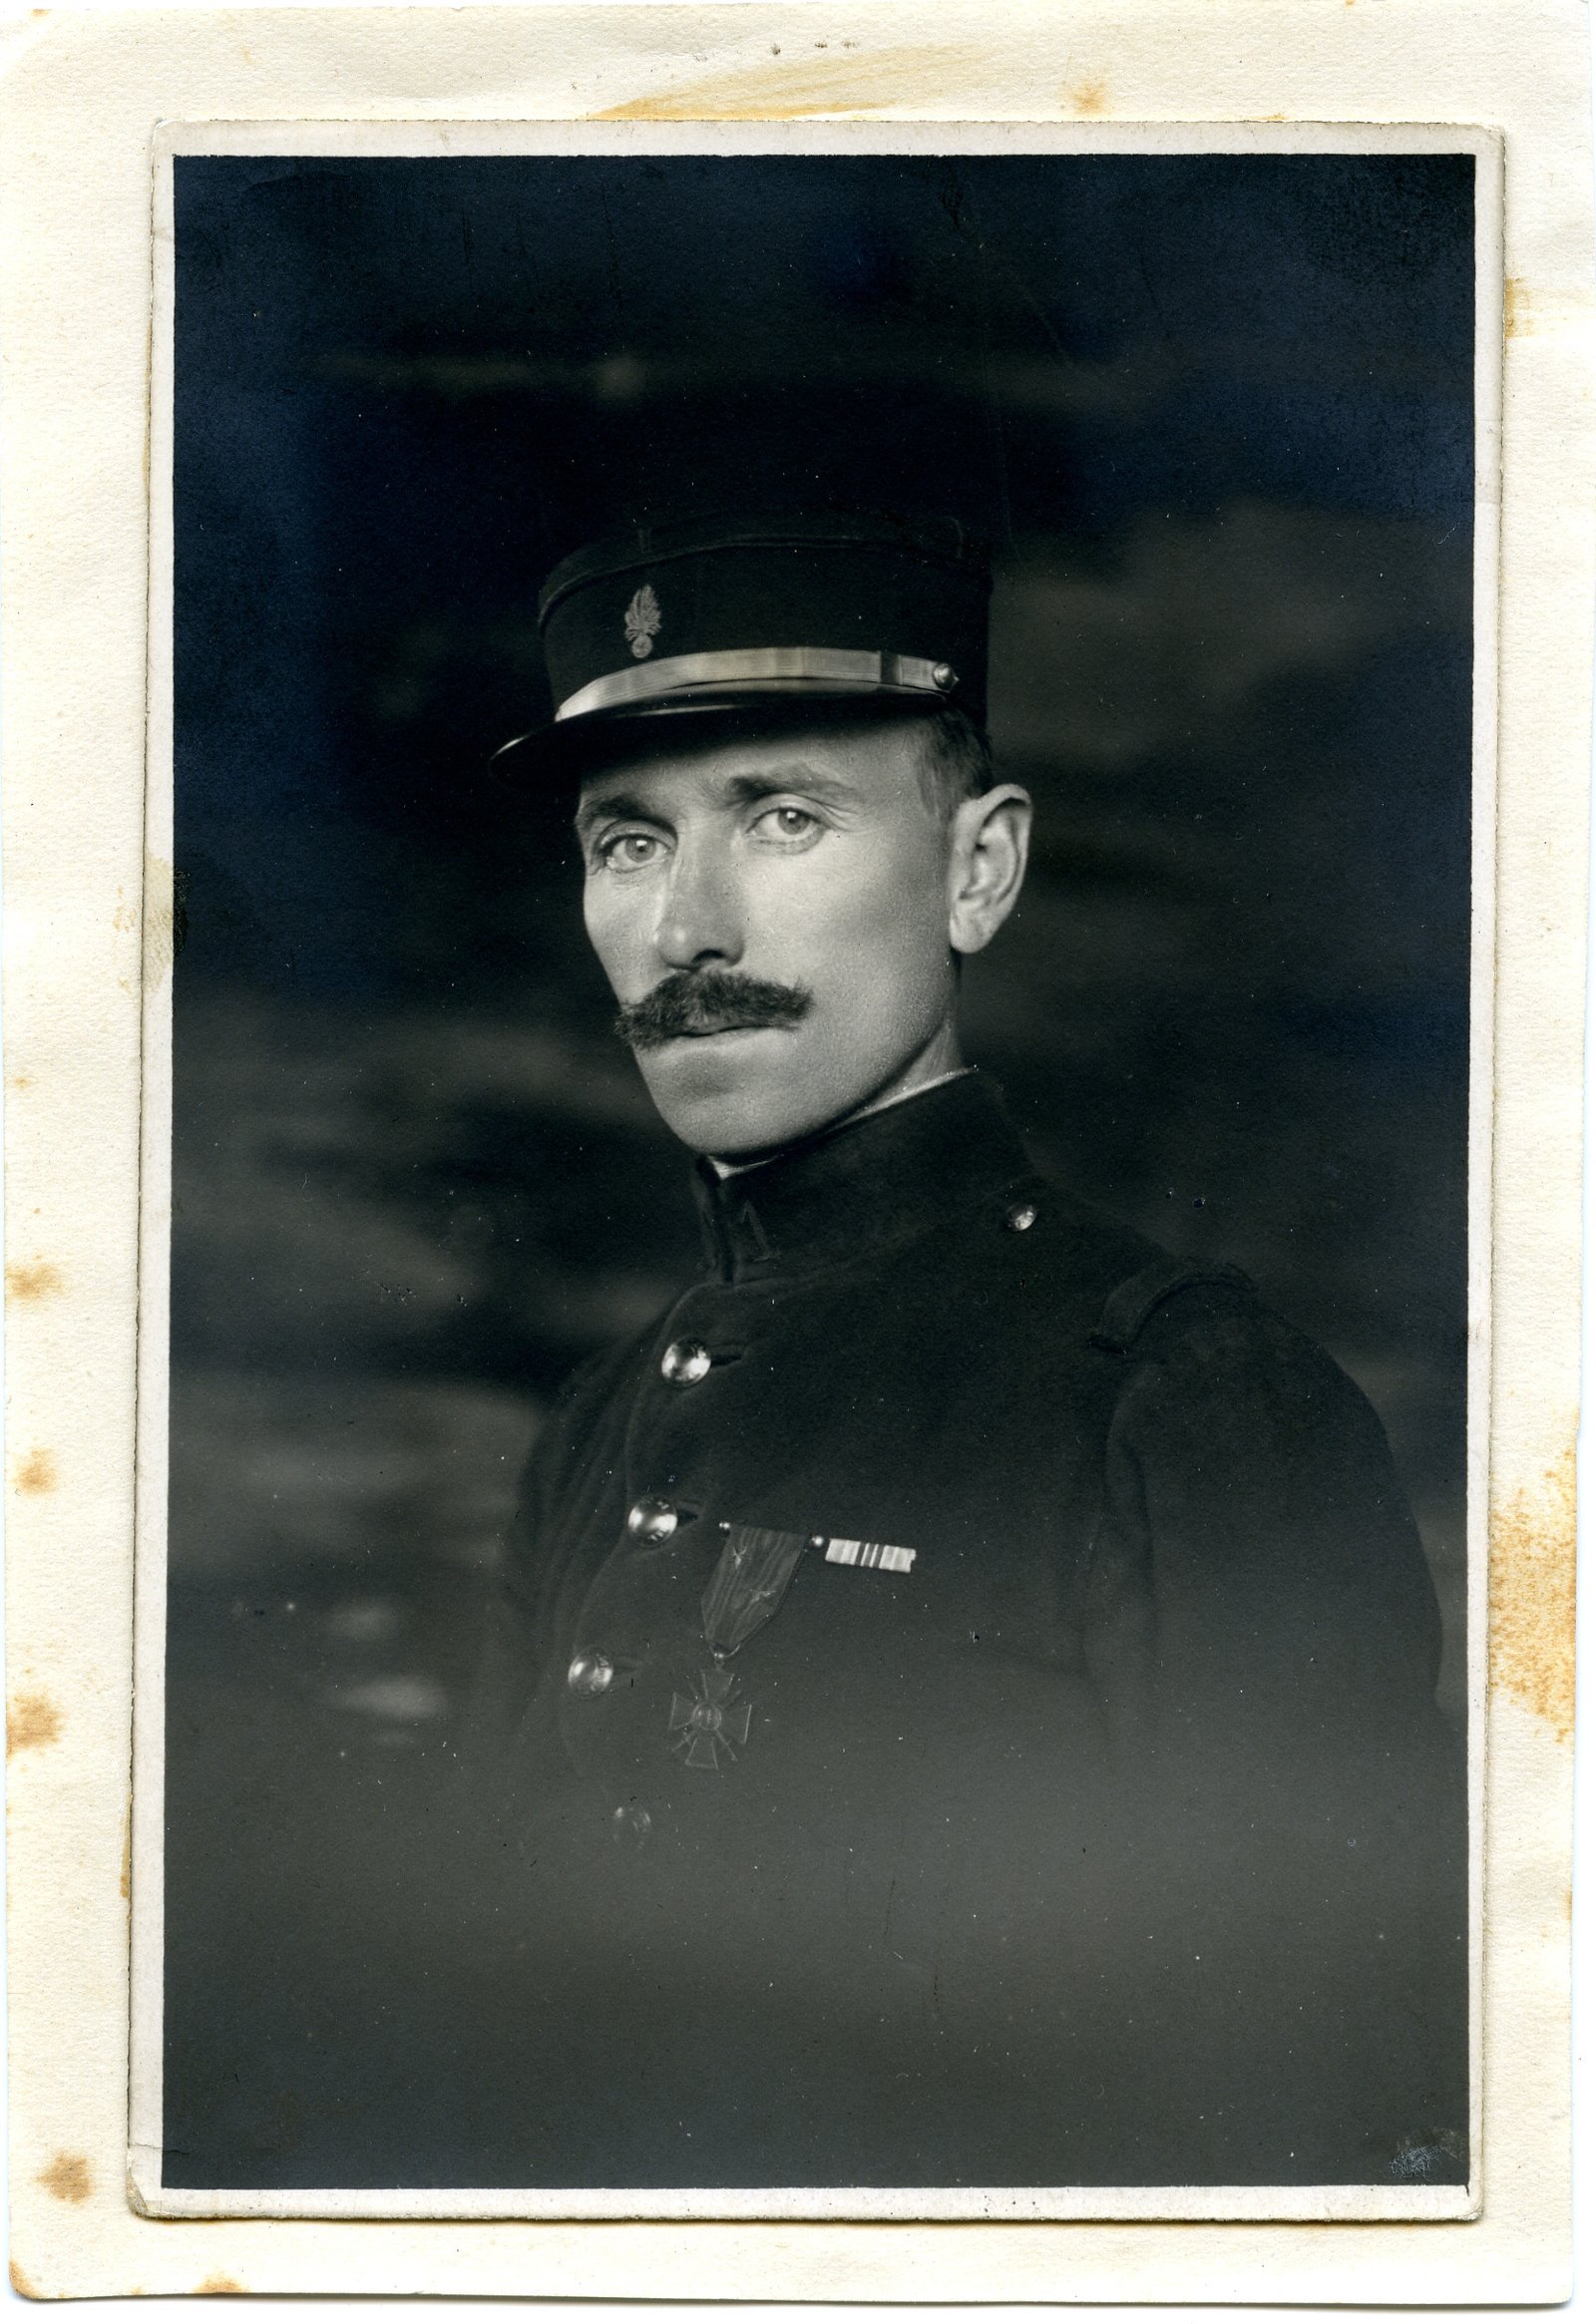 Image - The formidable Michael MacWhite, in his Foreign Legion uniform (Reproduced by kind permission of UCD Archives)